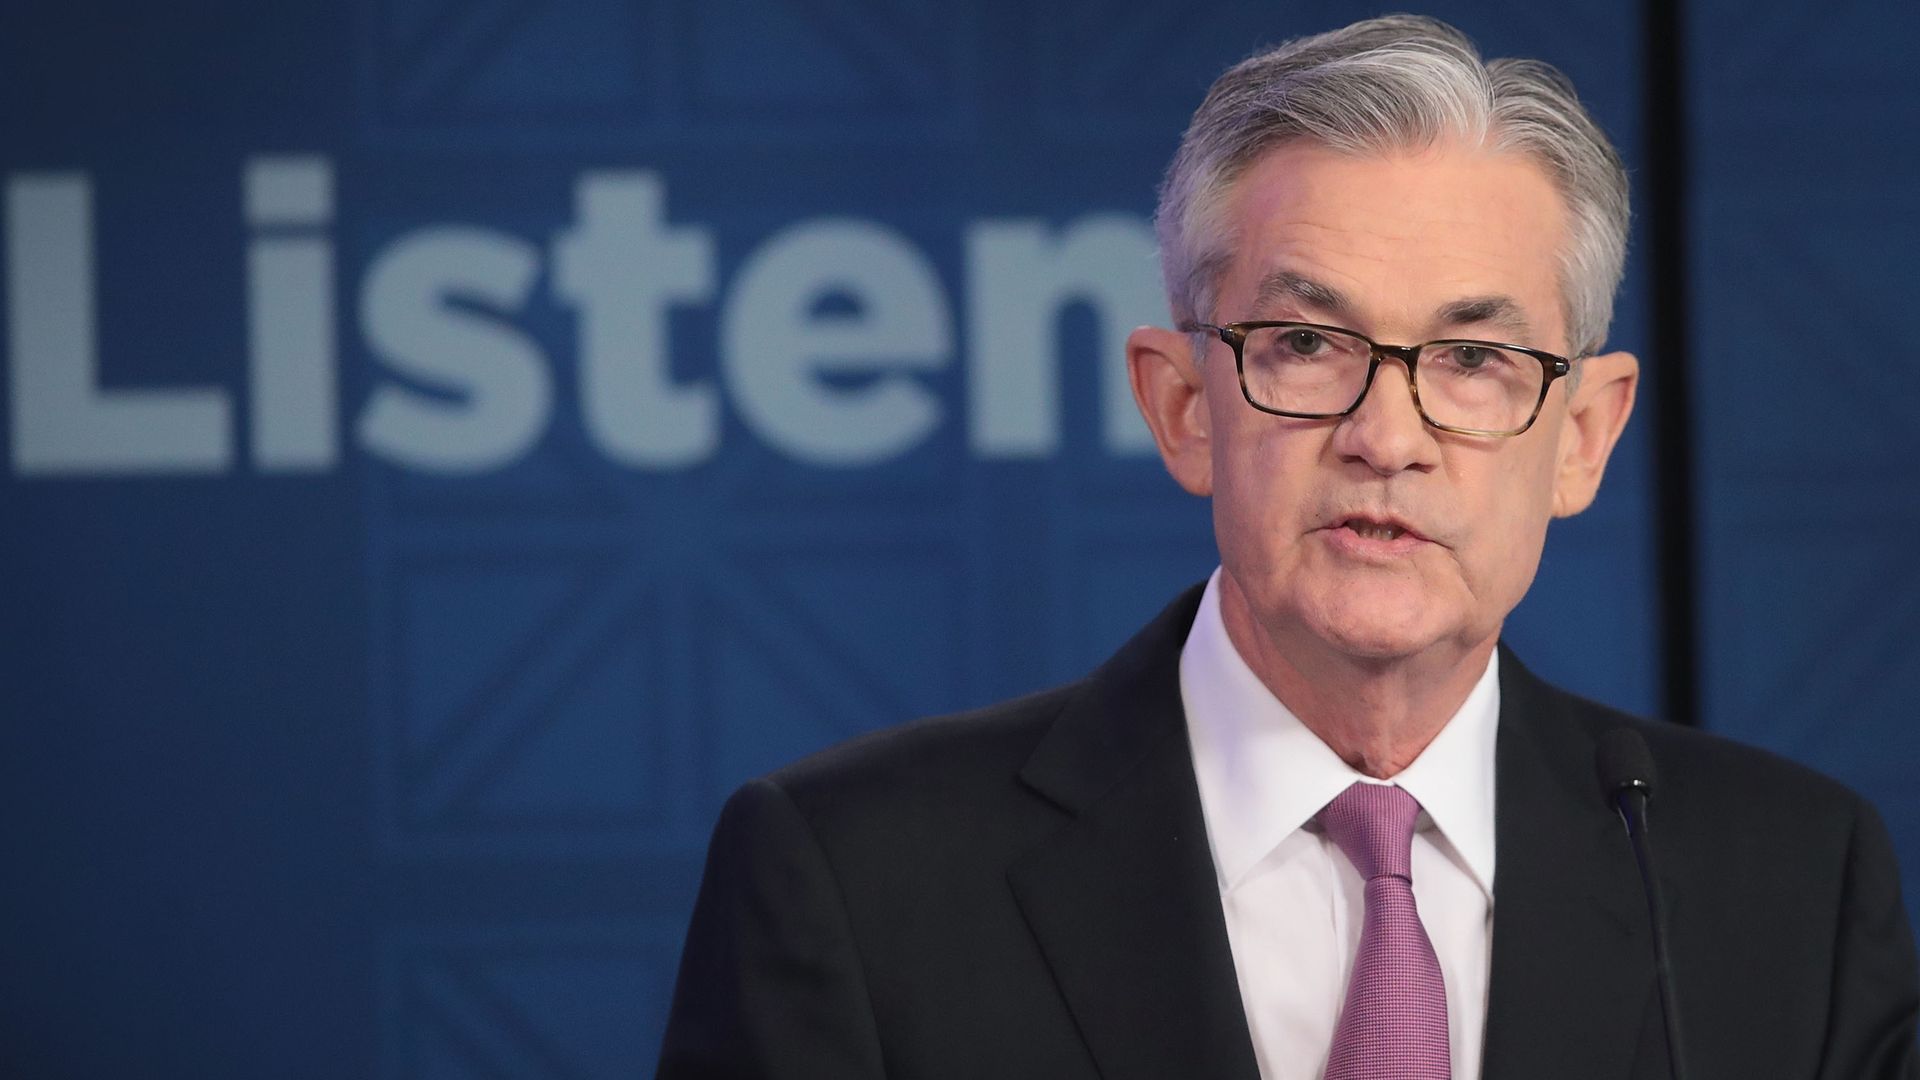 CHICAGO, ILLINOIS - JUNE 04: Jerome Powell, Chair, Board of Governors of the Federal Reserve speaks during a conference at the Federal Reserve Bank of Chicago on June 04, 2019 in Chicago, Illinois